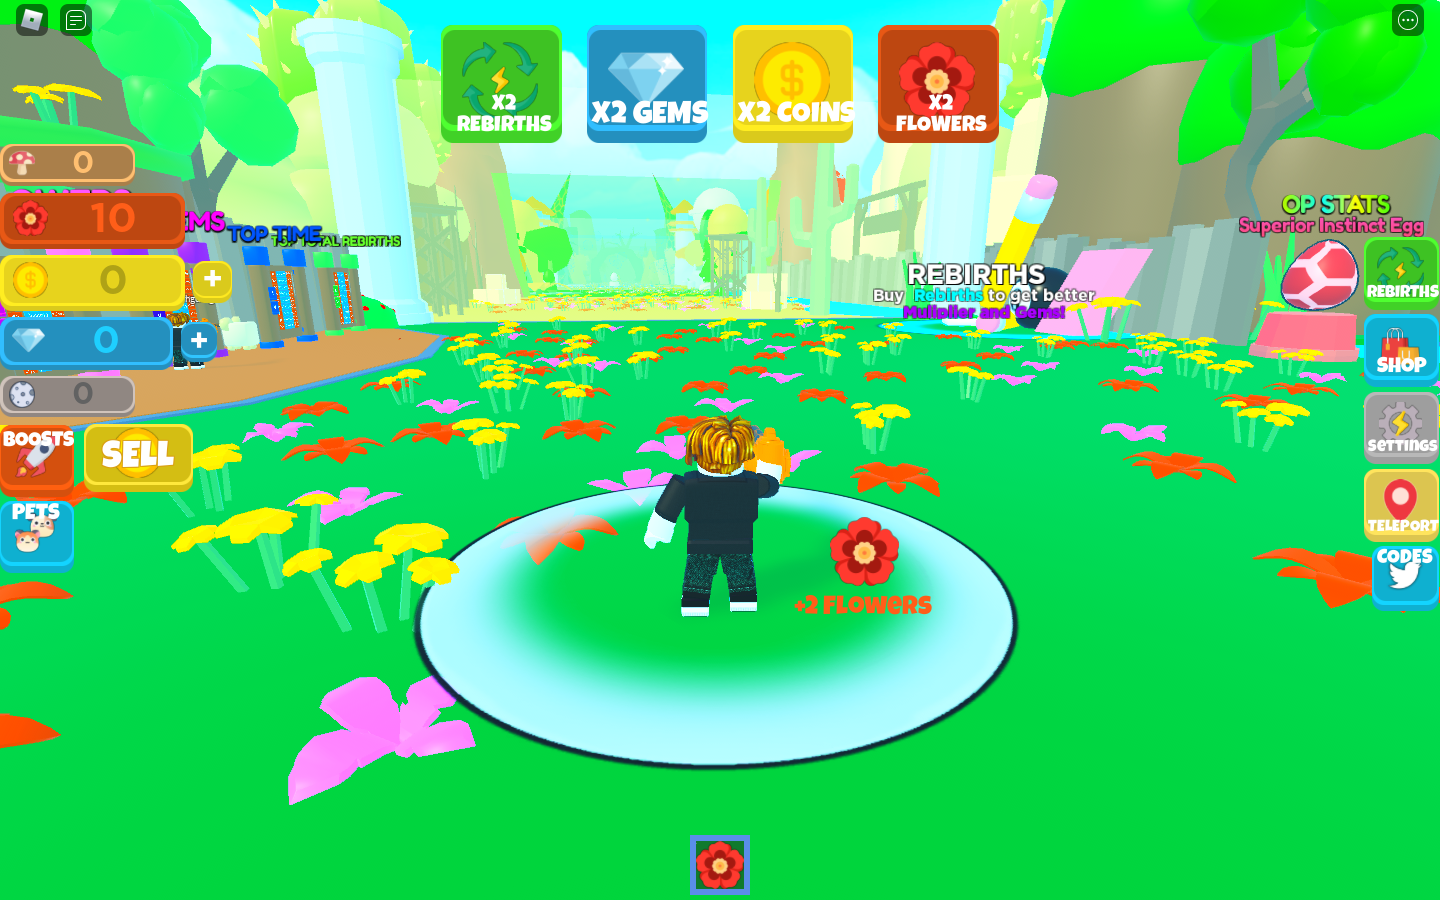 All Flower Magnet Simulator Codes(Roblox) - Tested October 2022